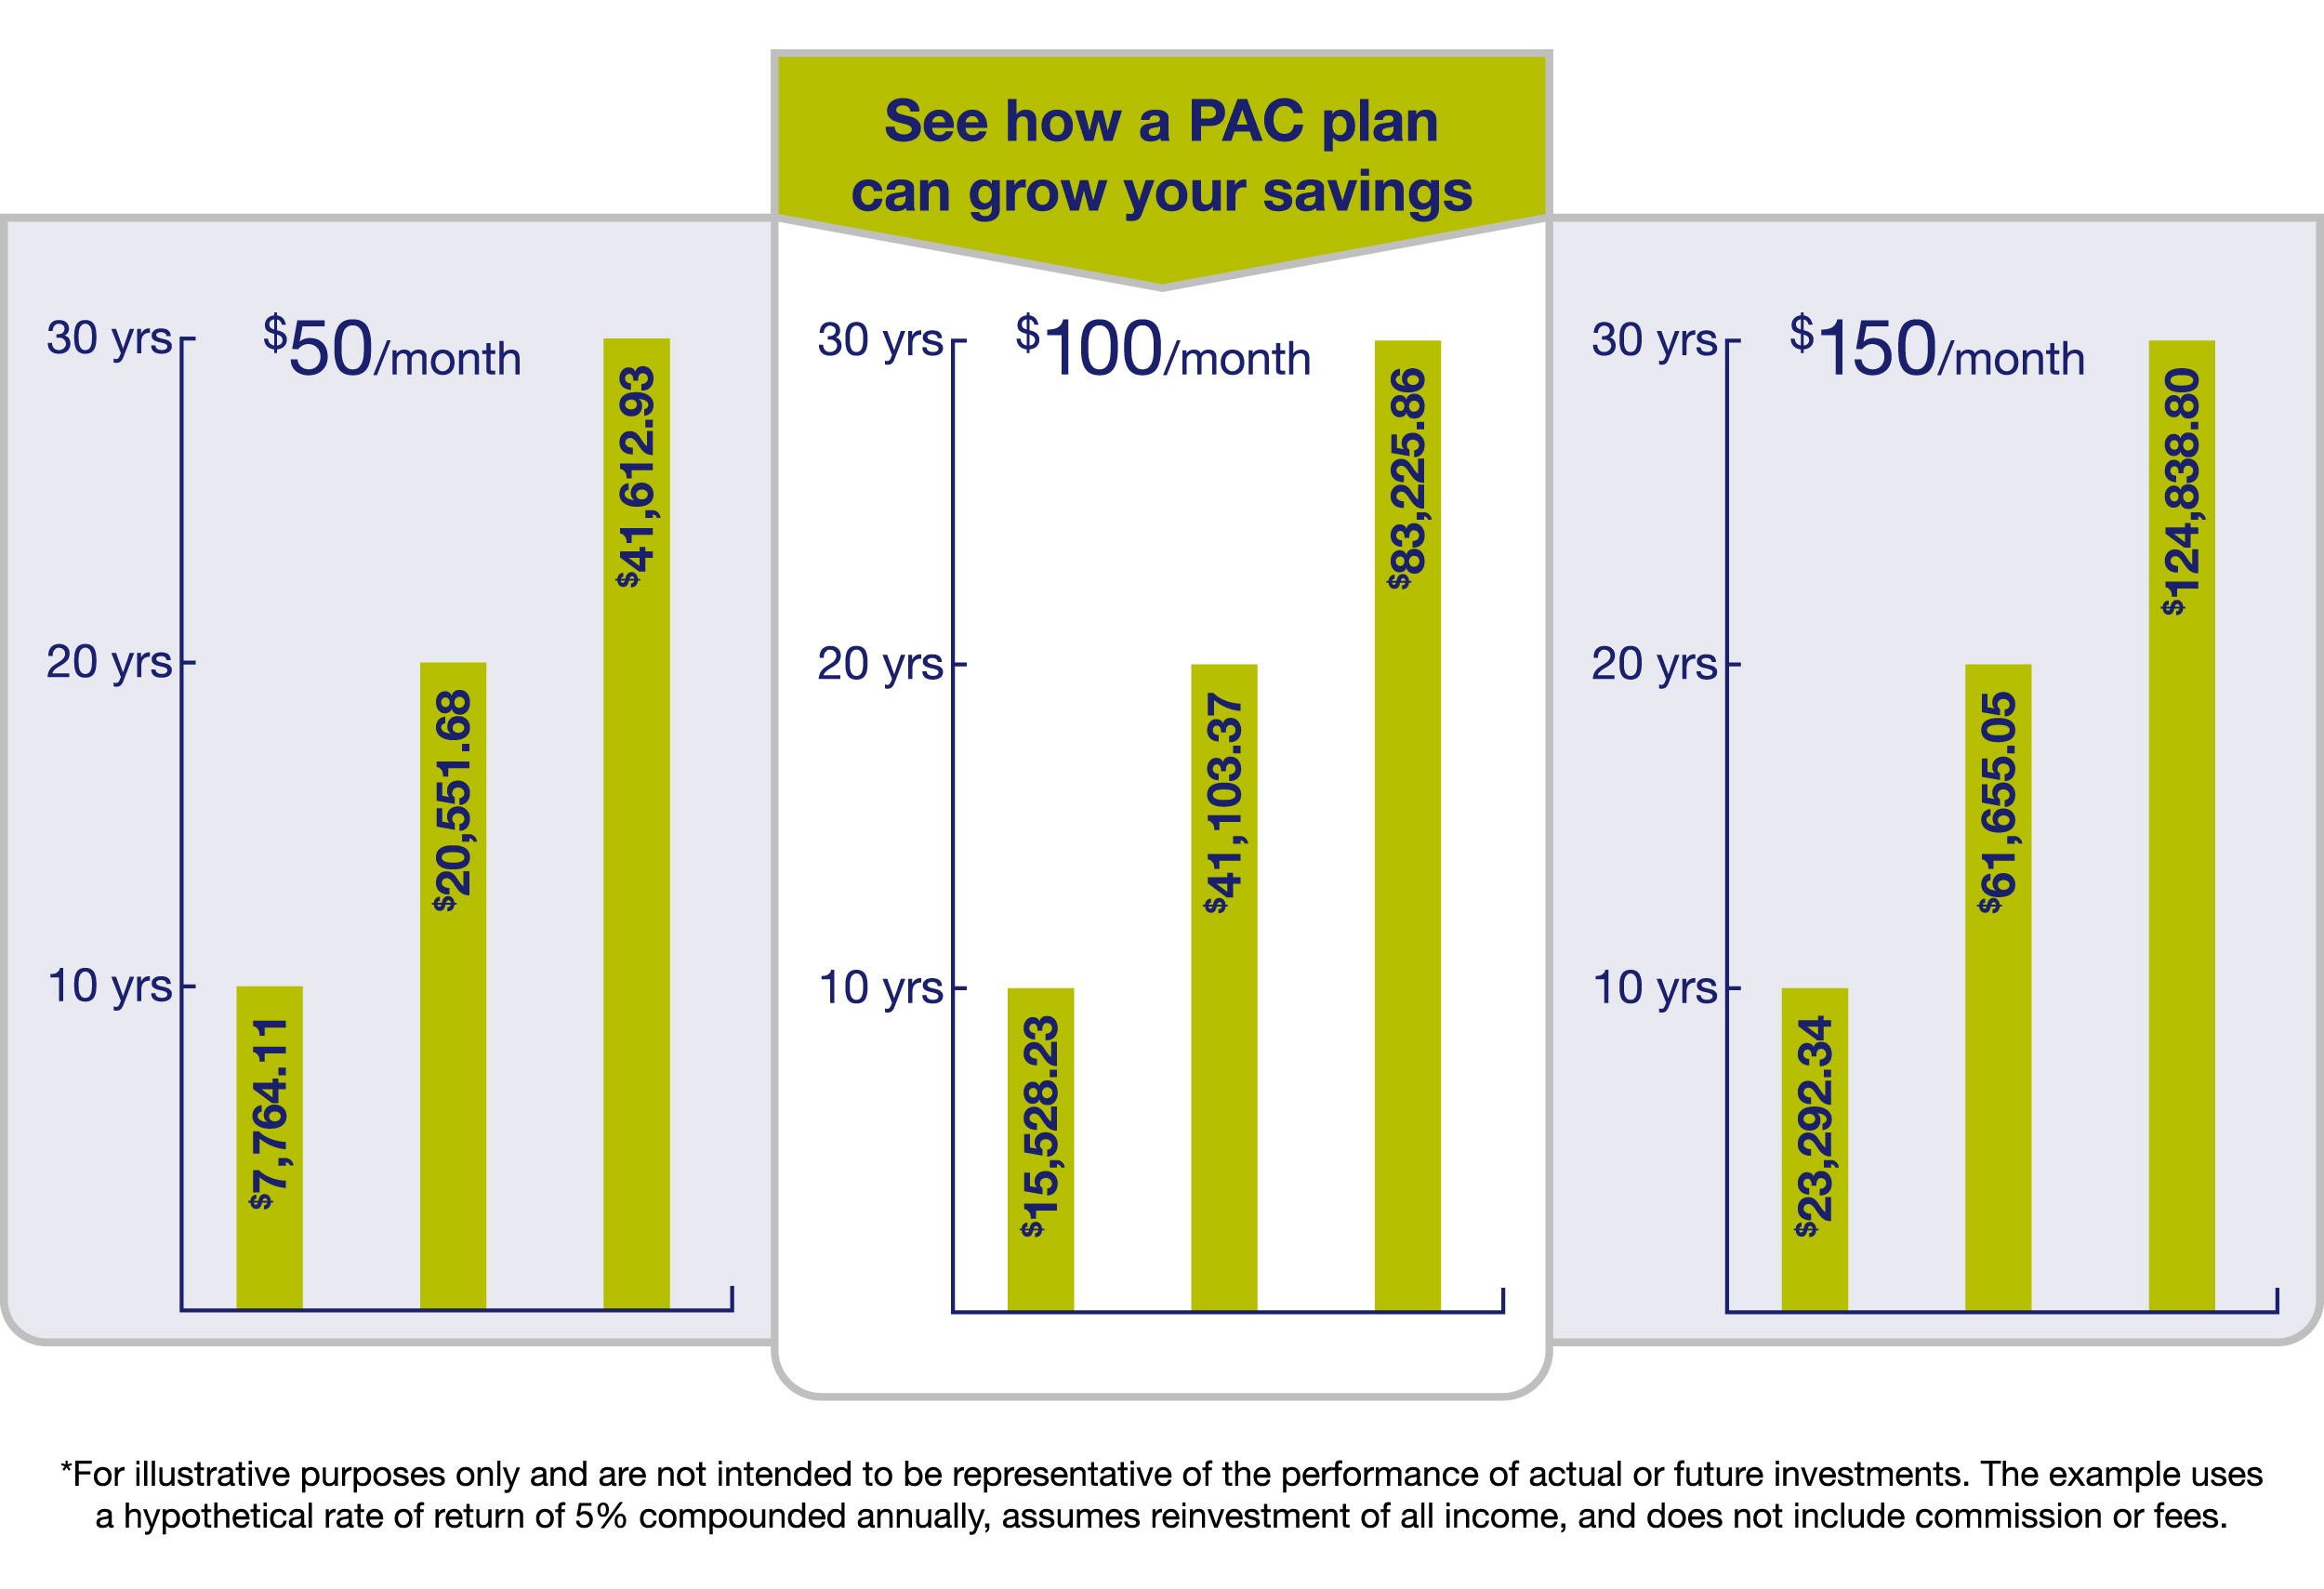 Illustration that depicts how a PAC plan can grow your savings with $50, $100, and $150 per month, over the course of 10, 20, and 30 years